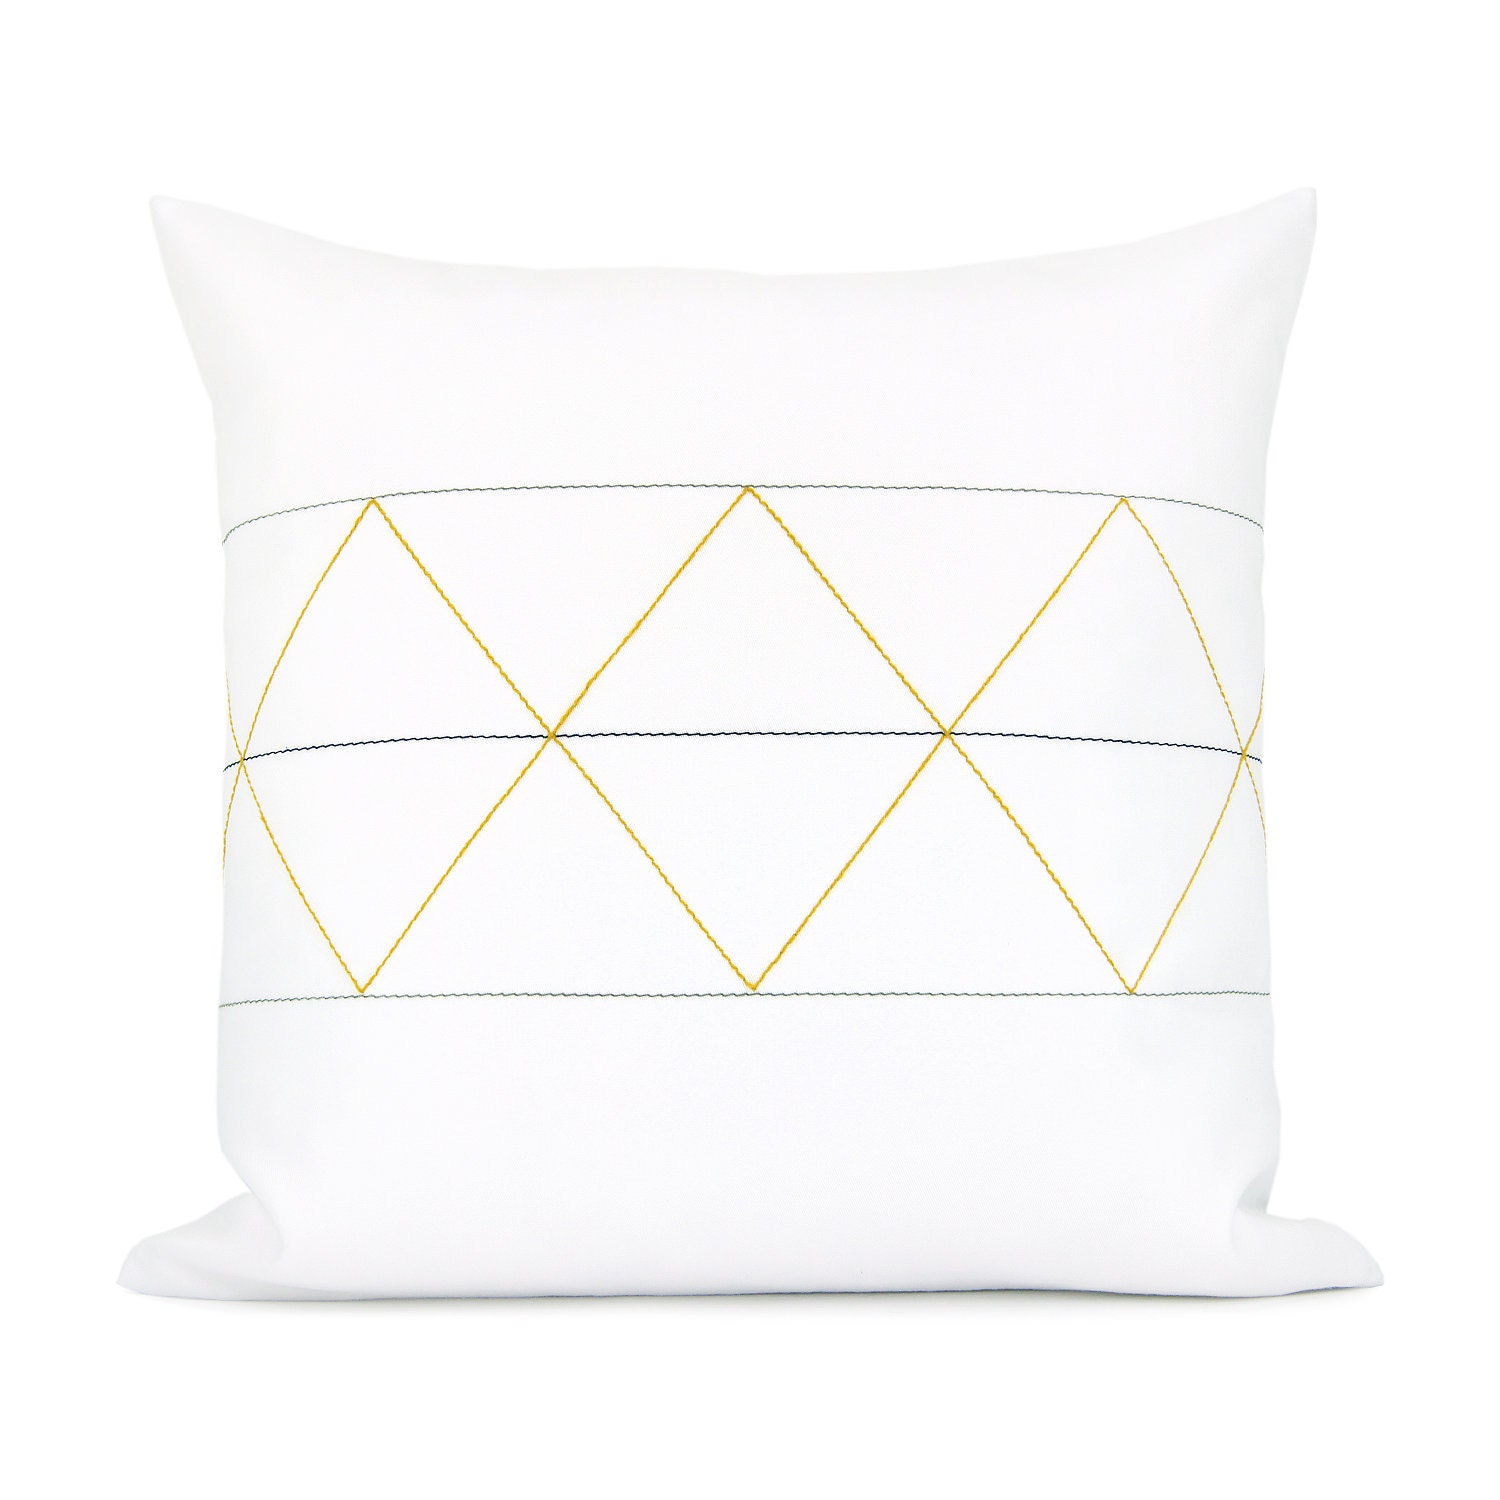 Geometric decorative pillow cover - Mustard yellow, navy blue, gray and white minimalist geometric pillow cover - 16x16 pillow case - ClassicByNature